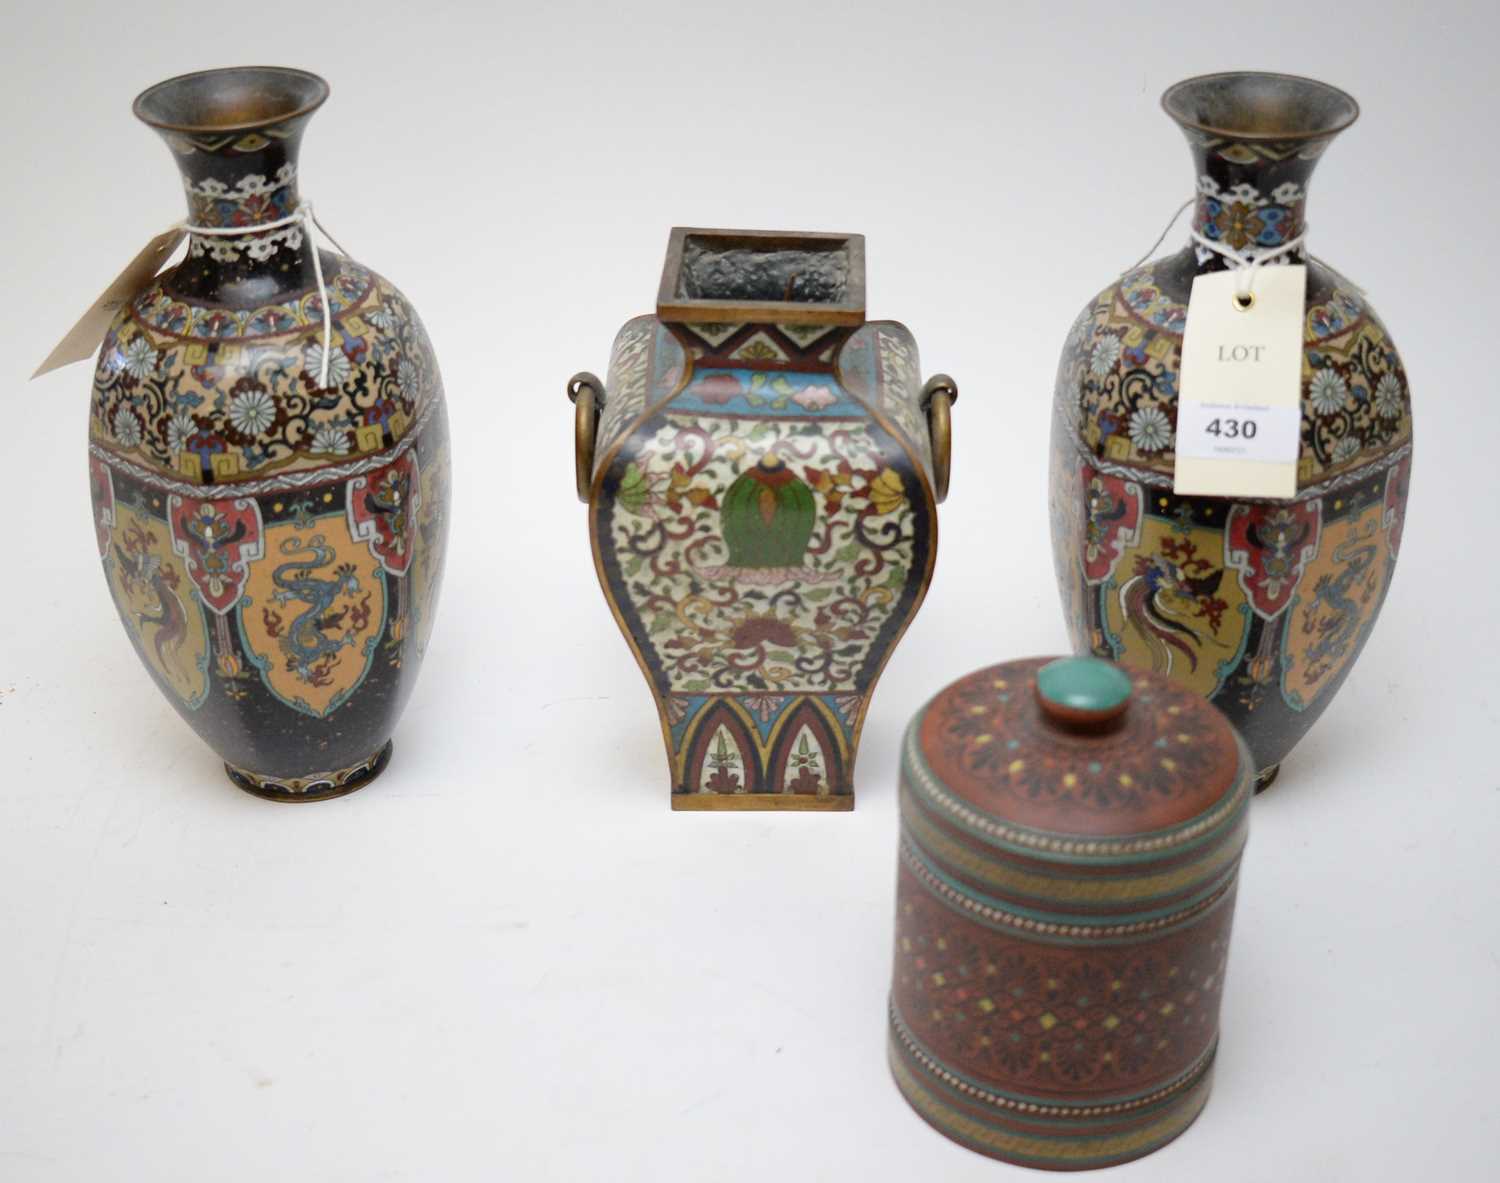 Lot 430 - Pair of Japanese cloisonne vases; Champleve vase; and Royal Doulton tobacco jar.